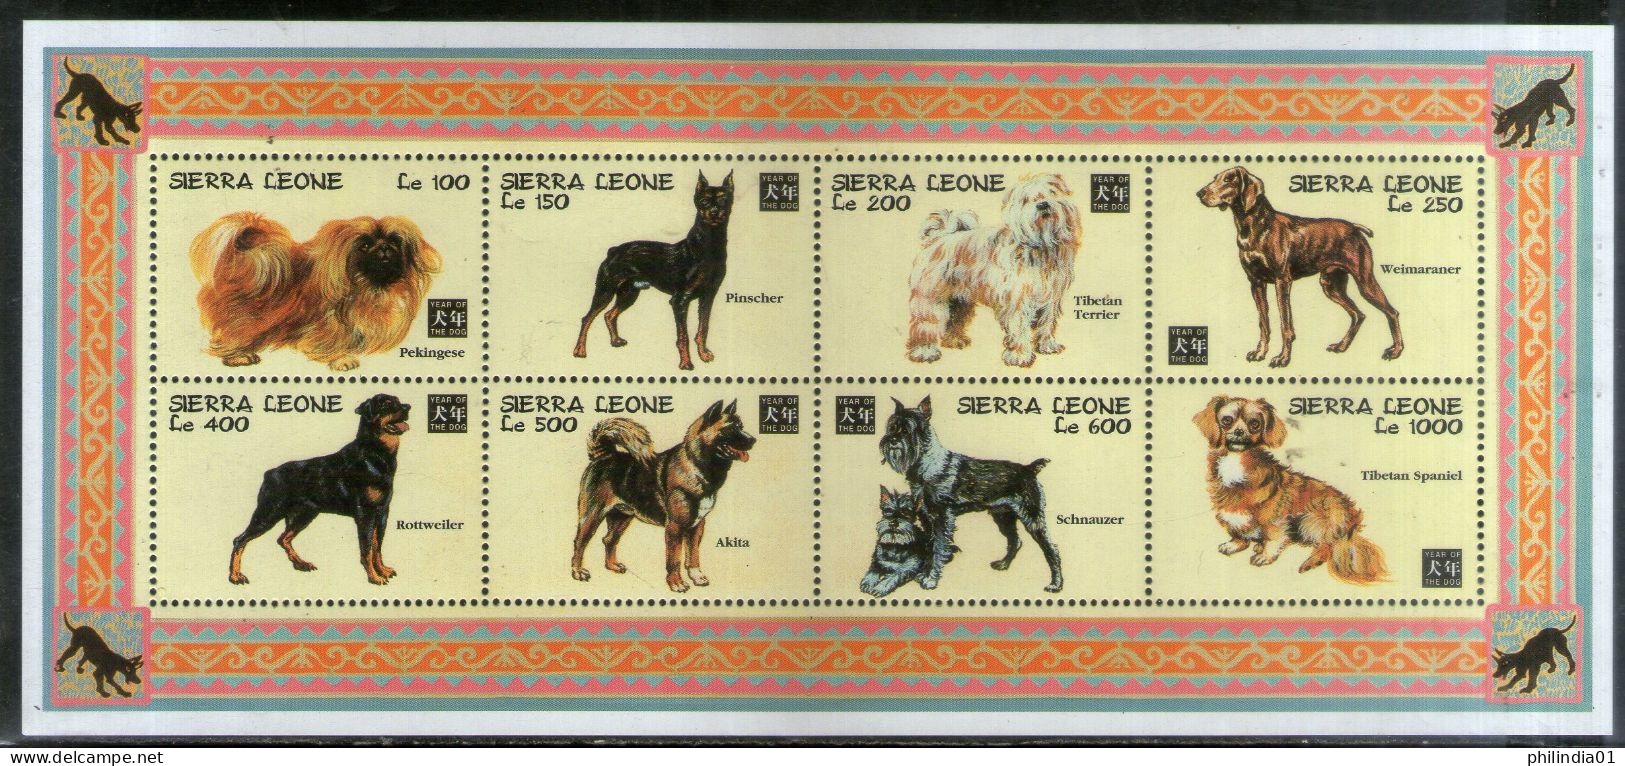 Sierra Leone 1994 Chinese New Year Dogs Animals Sc 1717 Sheetlet MNH # 6330 - Cani